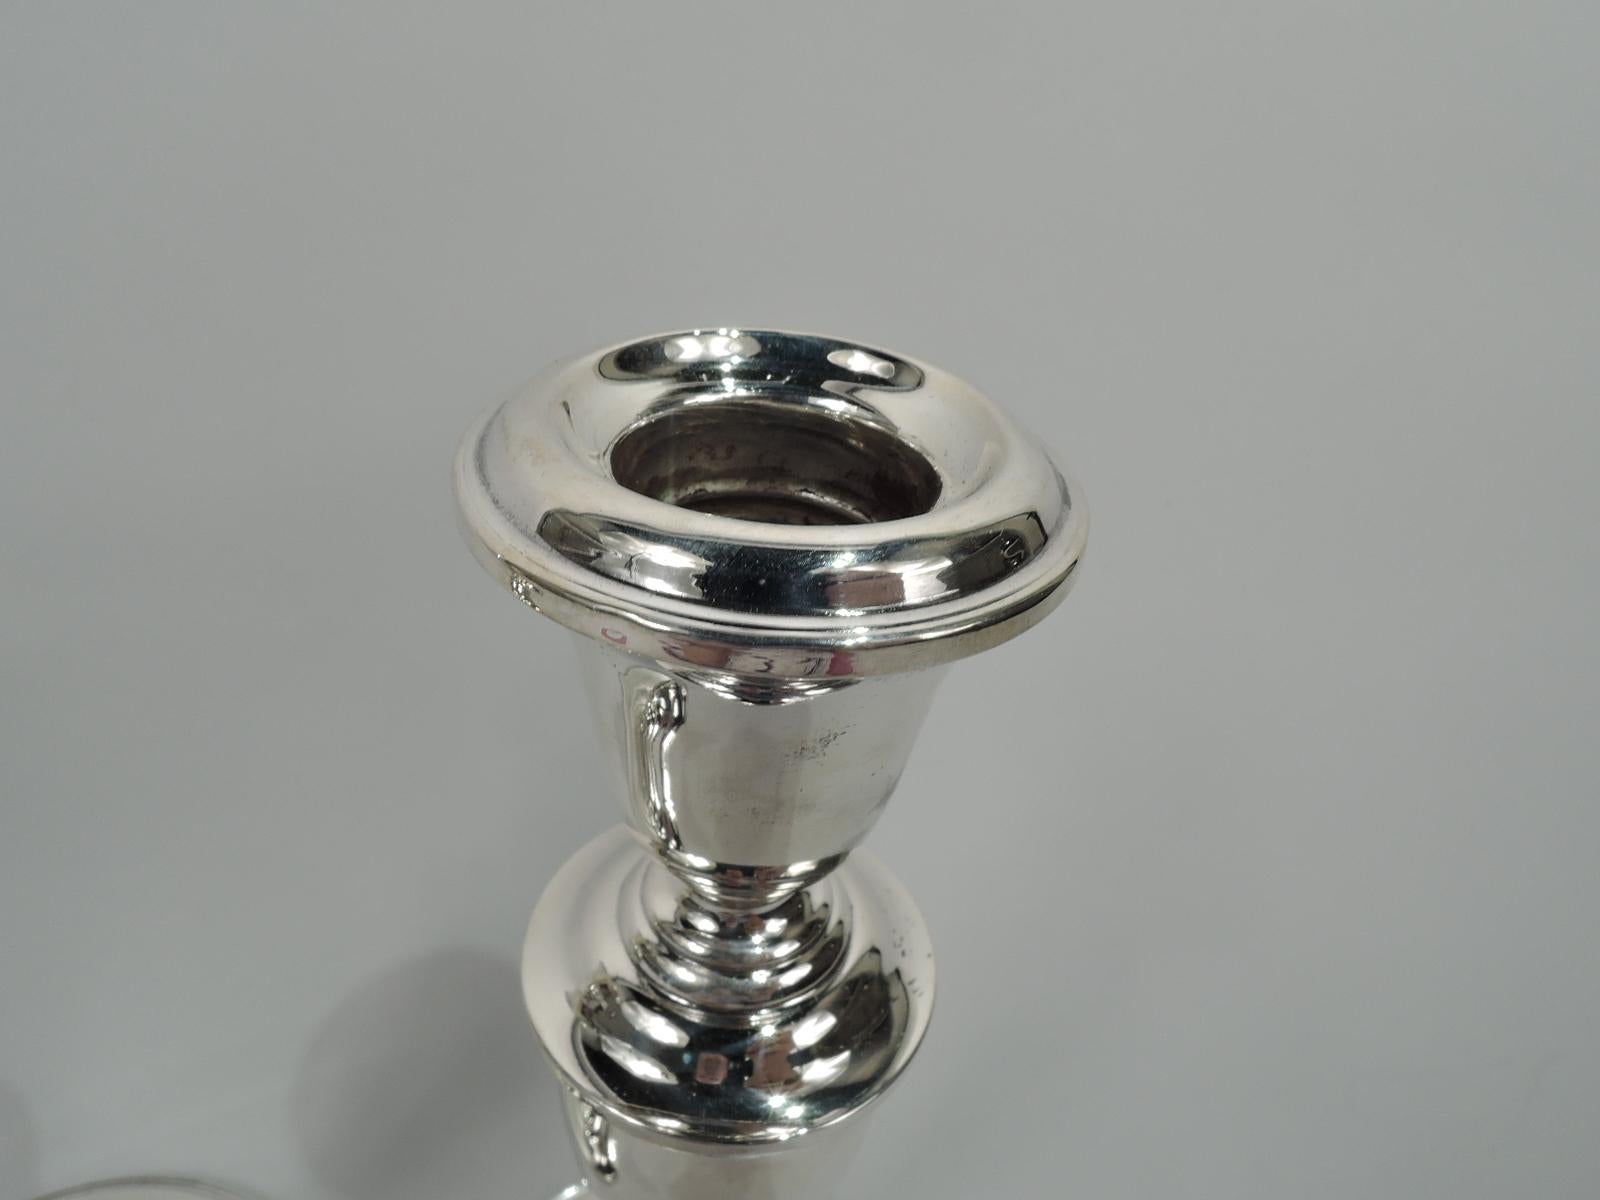 Pair of modern Georgian sterling silver candlesticks. Made by Gorham in Providence. Each: Urn socket on baluster shaft on domed foot. Unfussy traditional form. The perfect housewarming gift. Fully marked including maker’s stamp and no. 815/1.